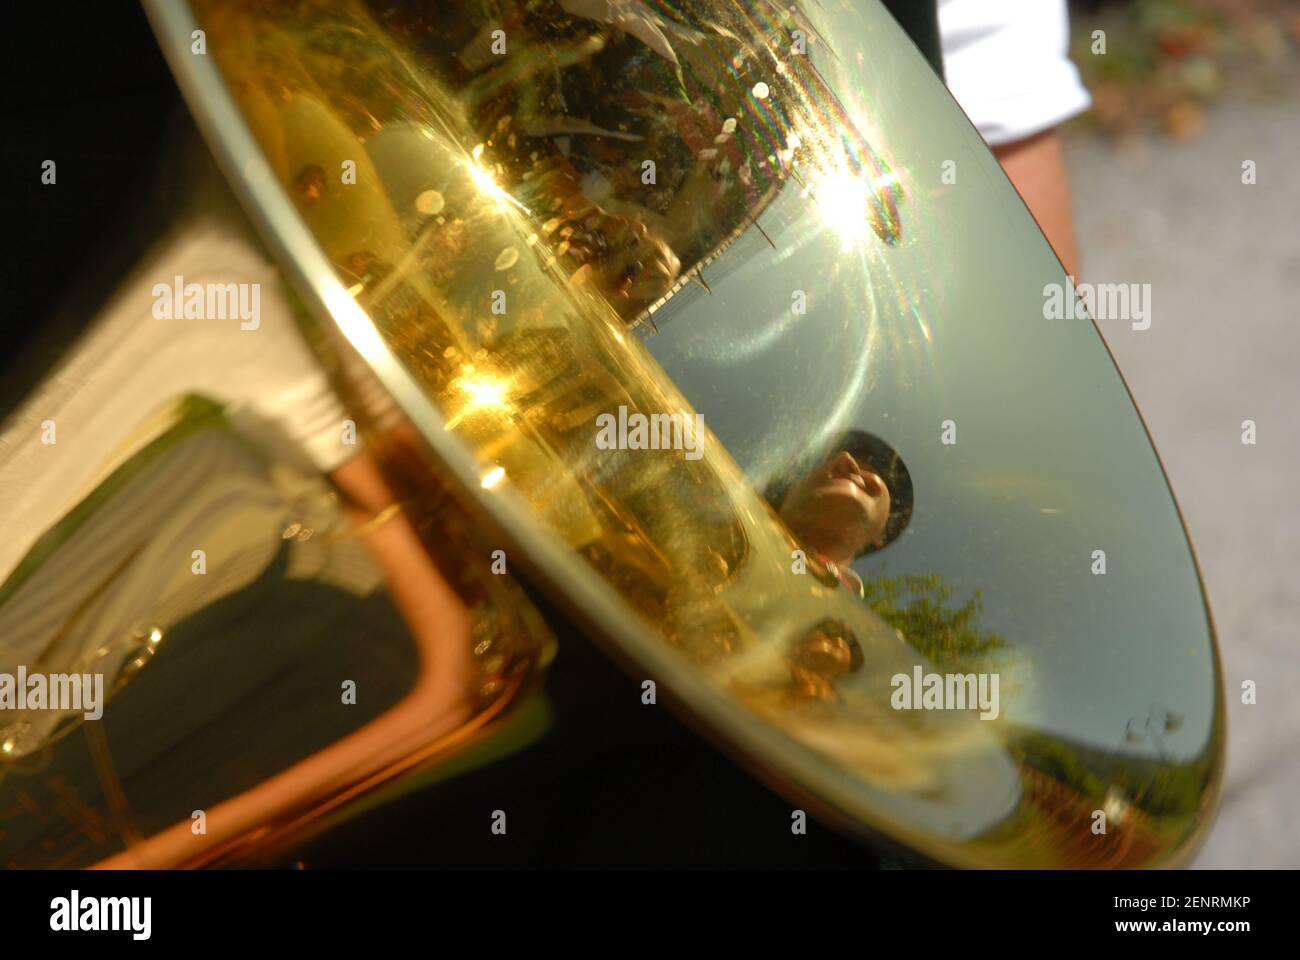 detail of tuba, wind instrument with reflection of man in alpine costum, Austria Stock Photo